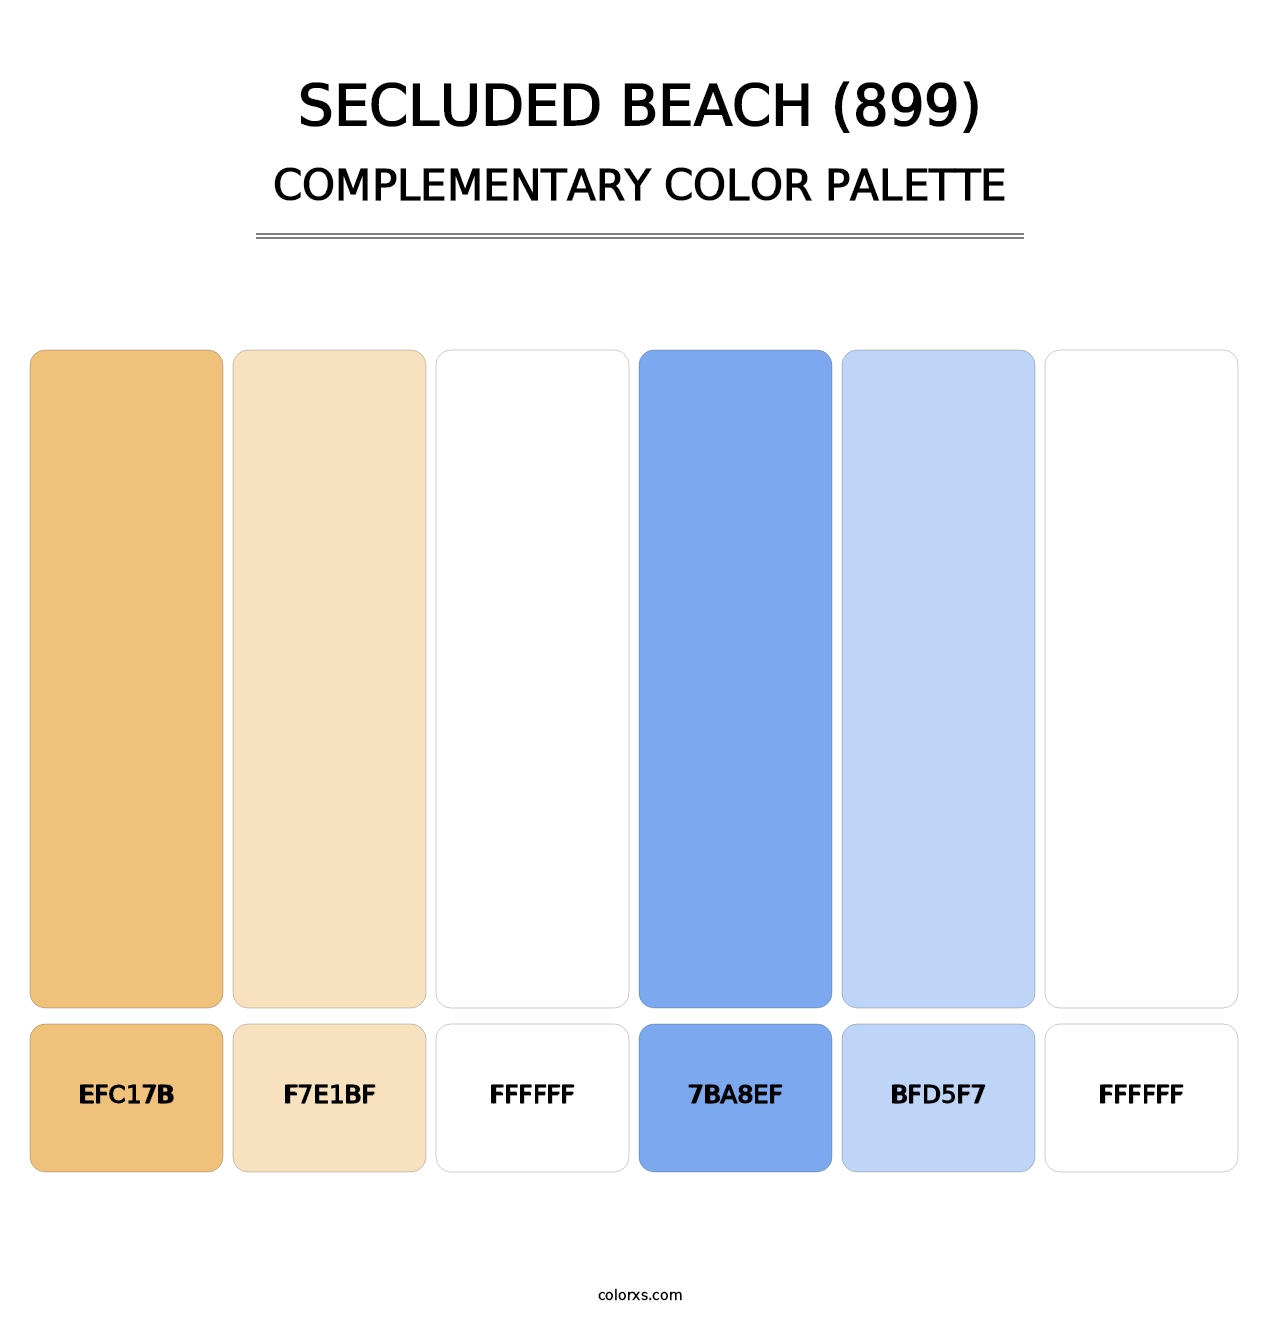 Secluded Beach (899) - Complementary Color Palette